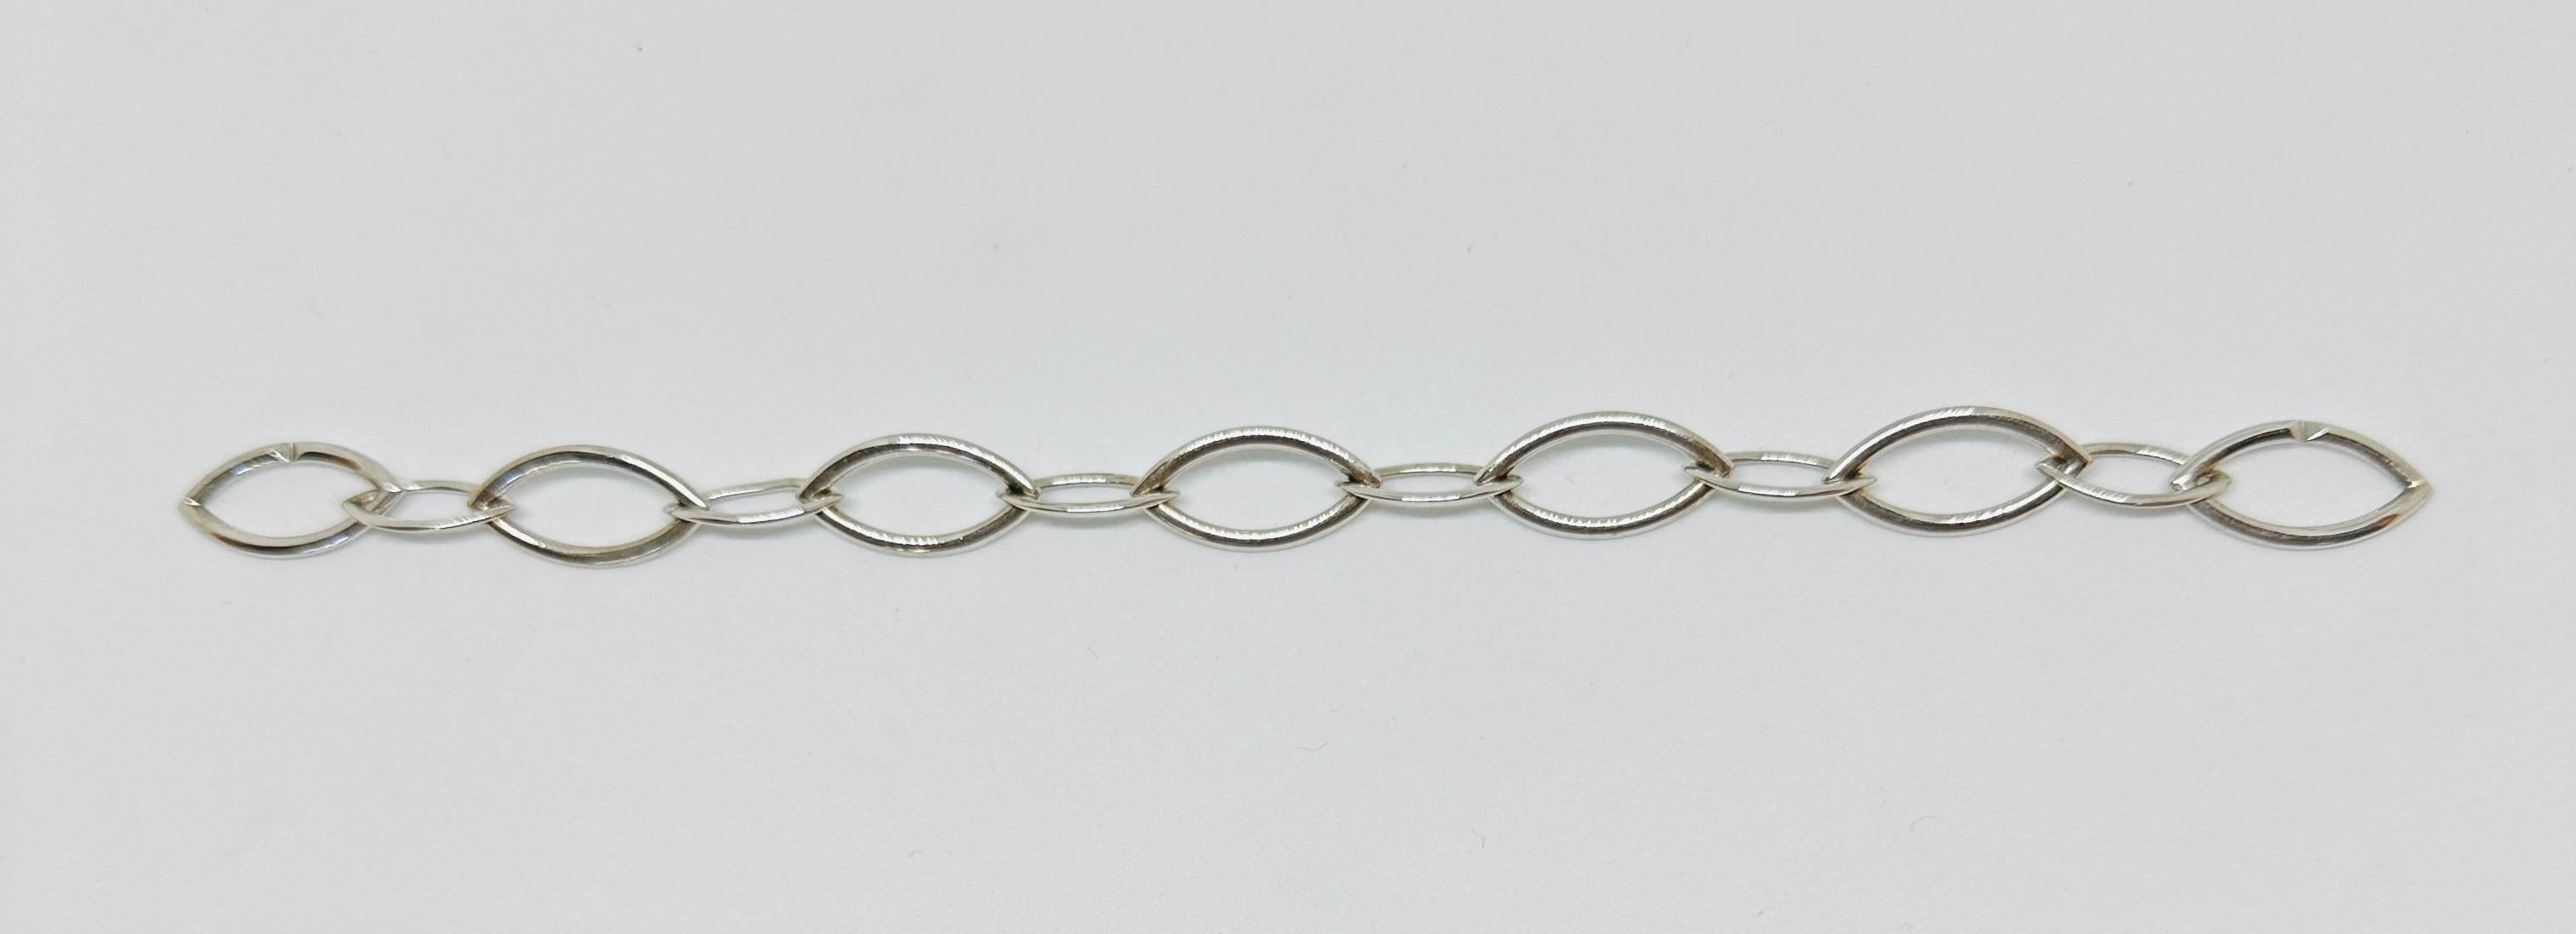 Extremely rare sterling silver link bracelet from the Doppio Senso collection by Vhernier Milano.

The sculptural links move easily on the wrist. The bracelet, marked VHERNIER, 925 and Italy, is 8 inches in length and is in excellent pre-owned